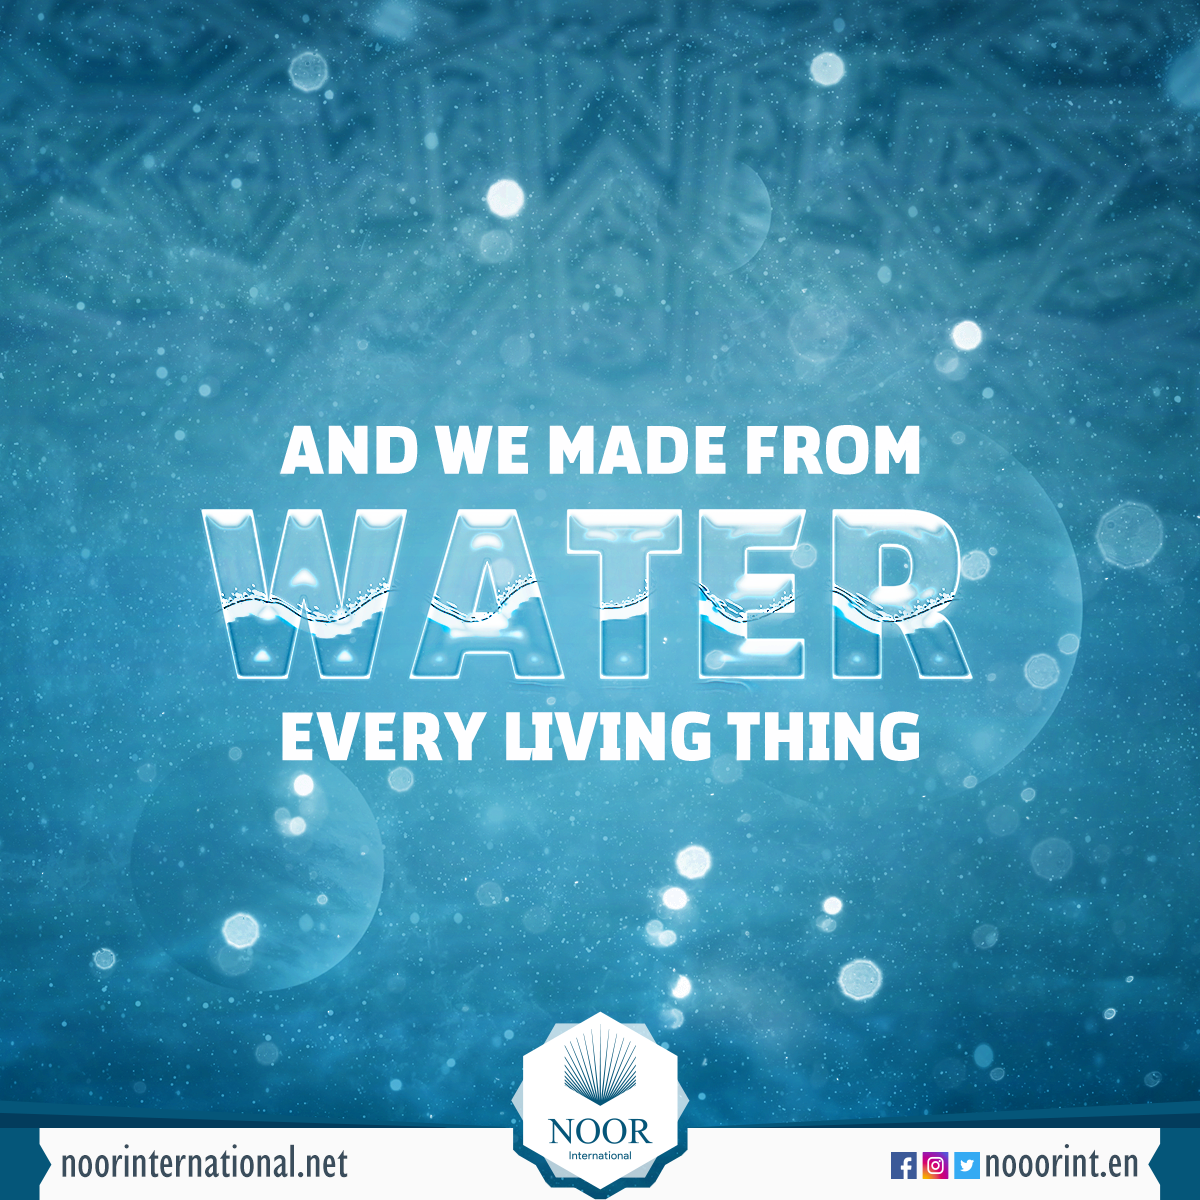 And we made from water every living thing